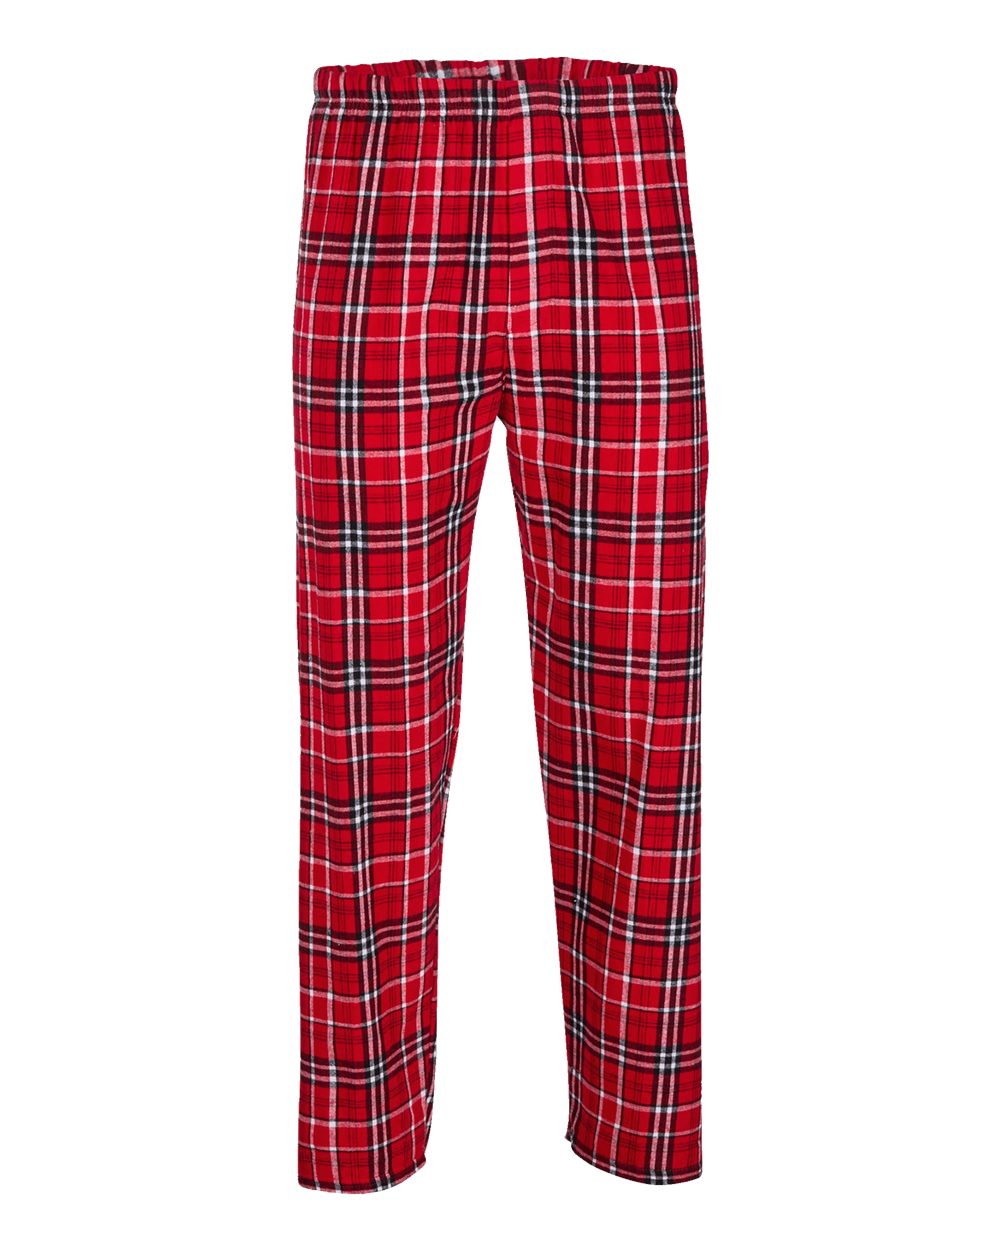 Boxercraft Unisex Flannel Pants Red and White Flannel Pants with Custom Text